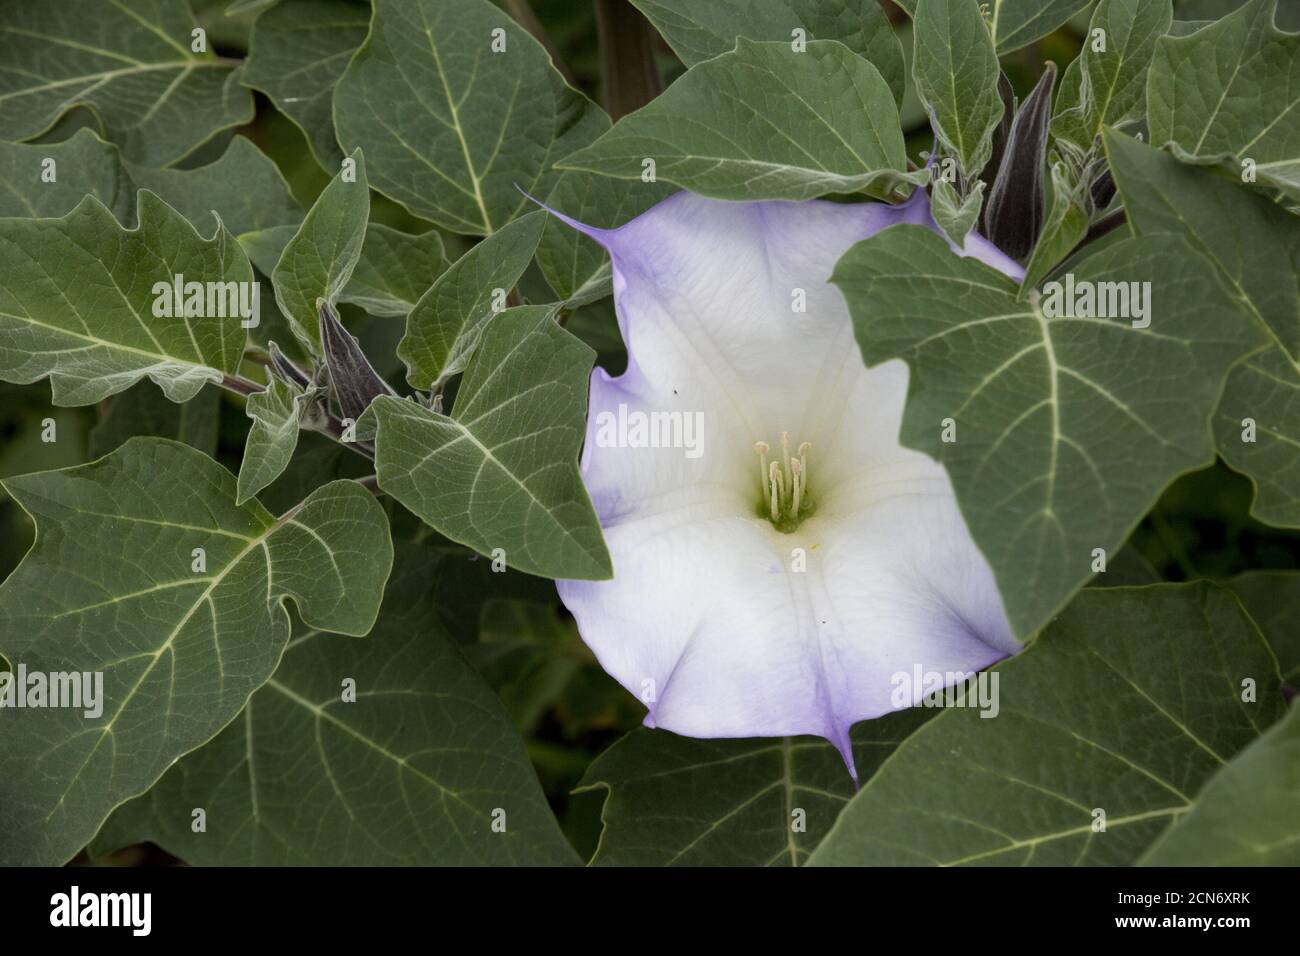 nightshade plant Physochlaina orientalis in the botanical garden - flower and leaves Stock Photo